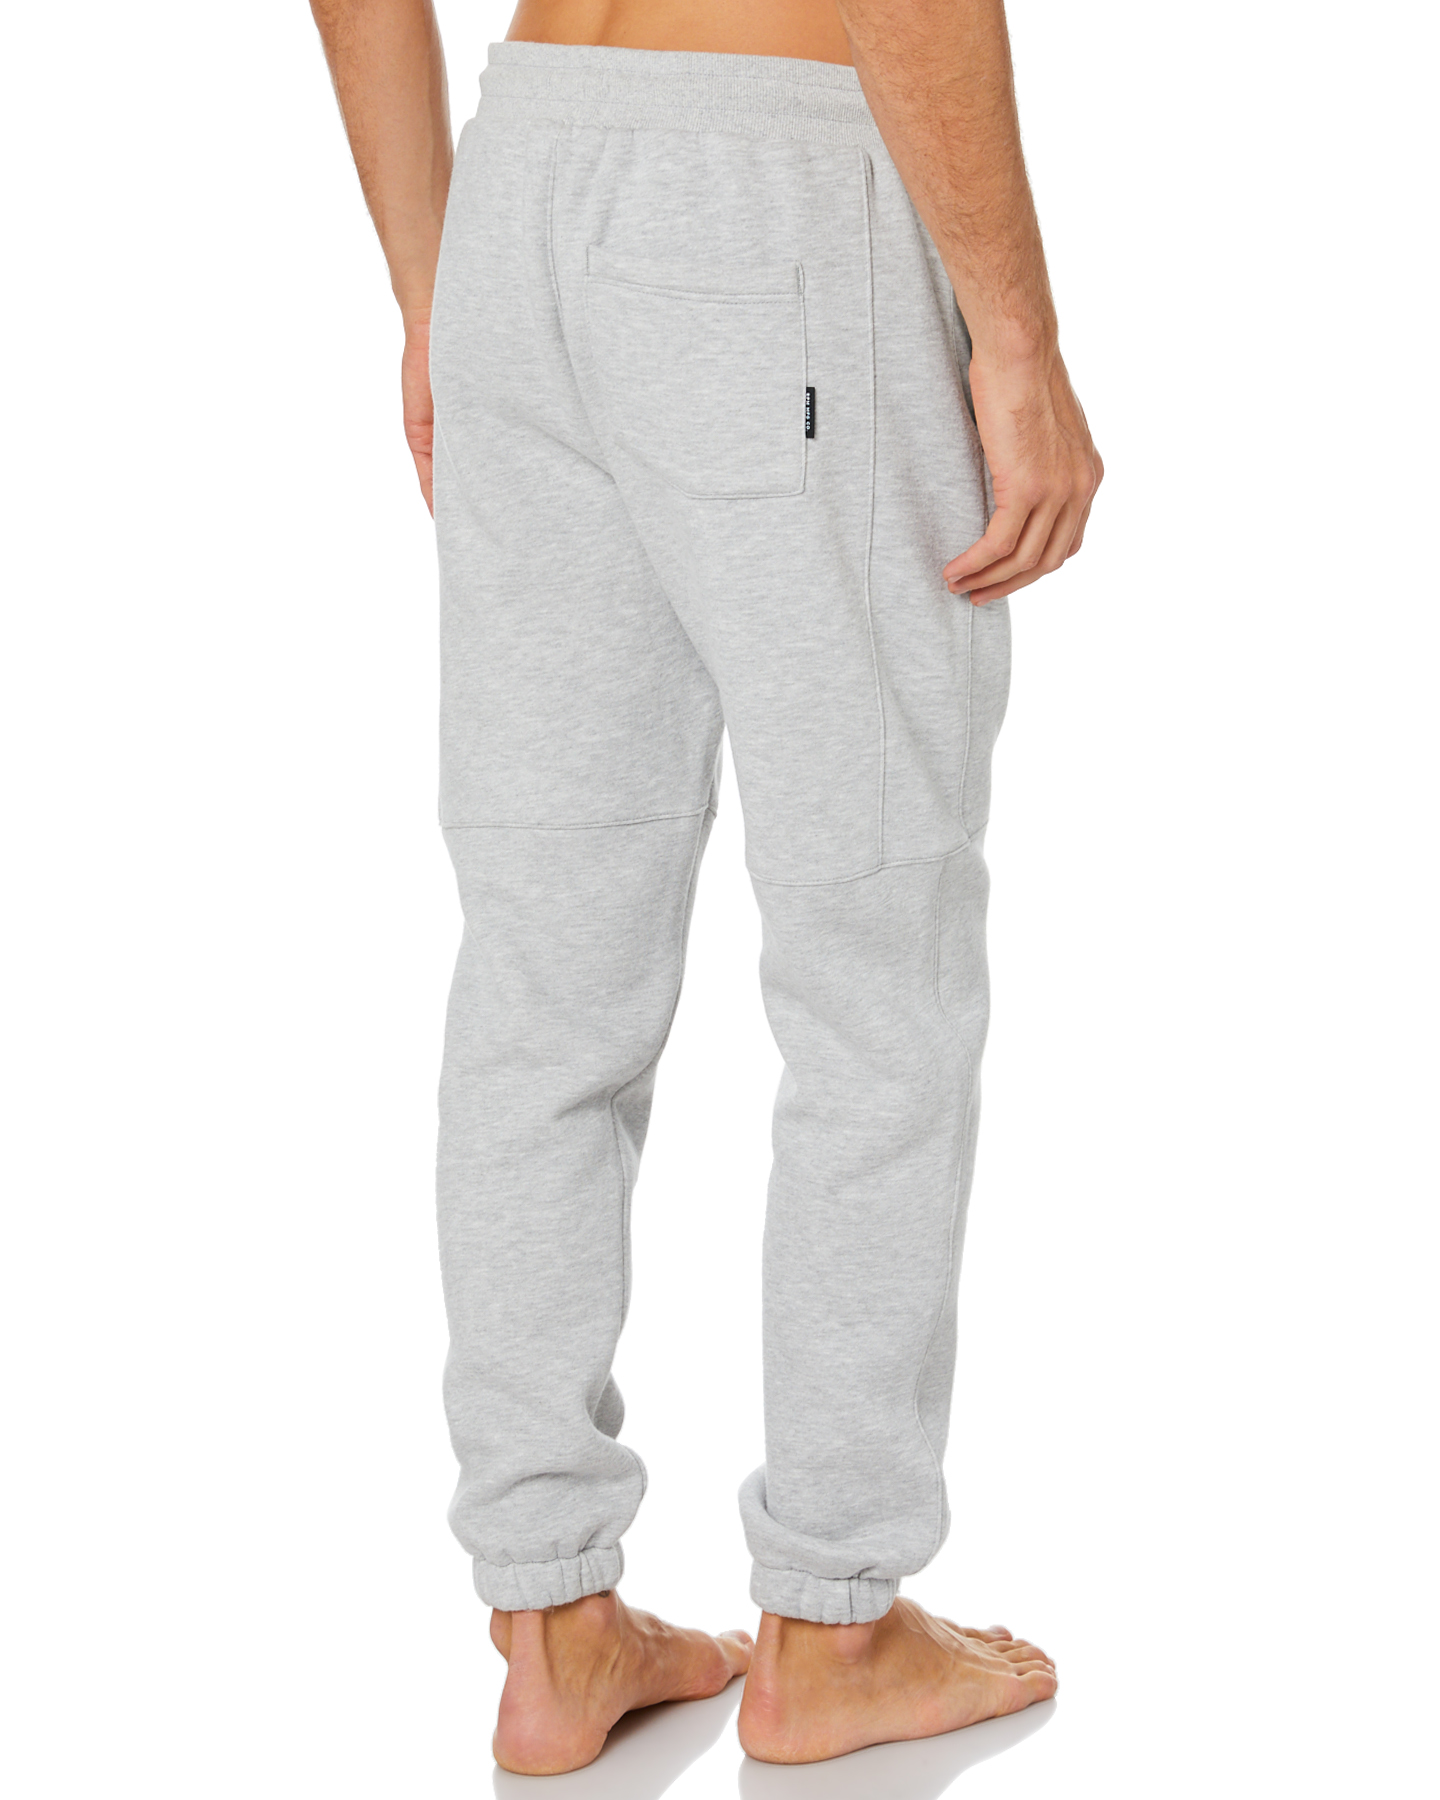 Rpm Mens Track Pant - Grey Marle | SurfStitch